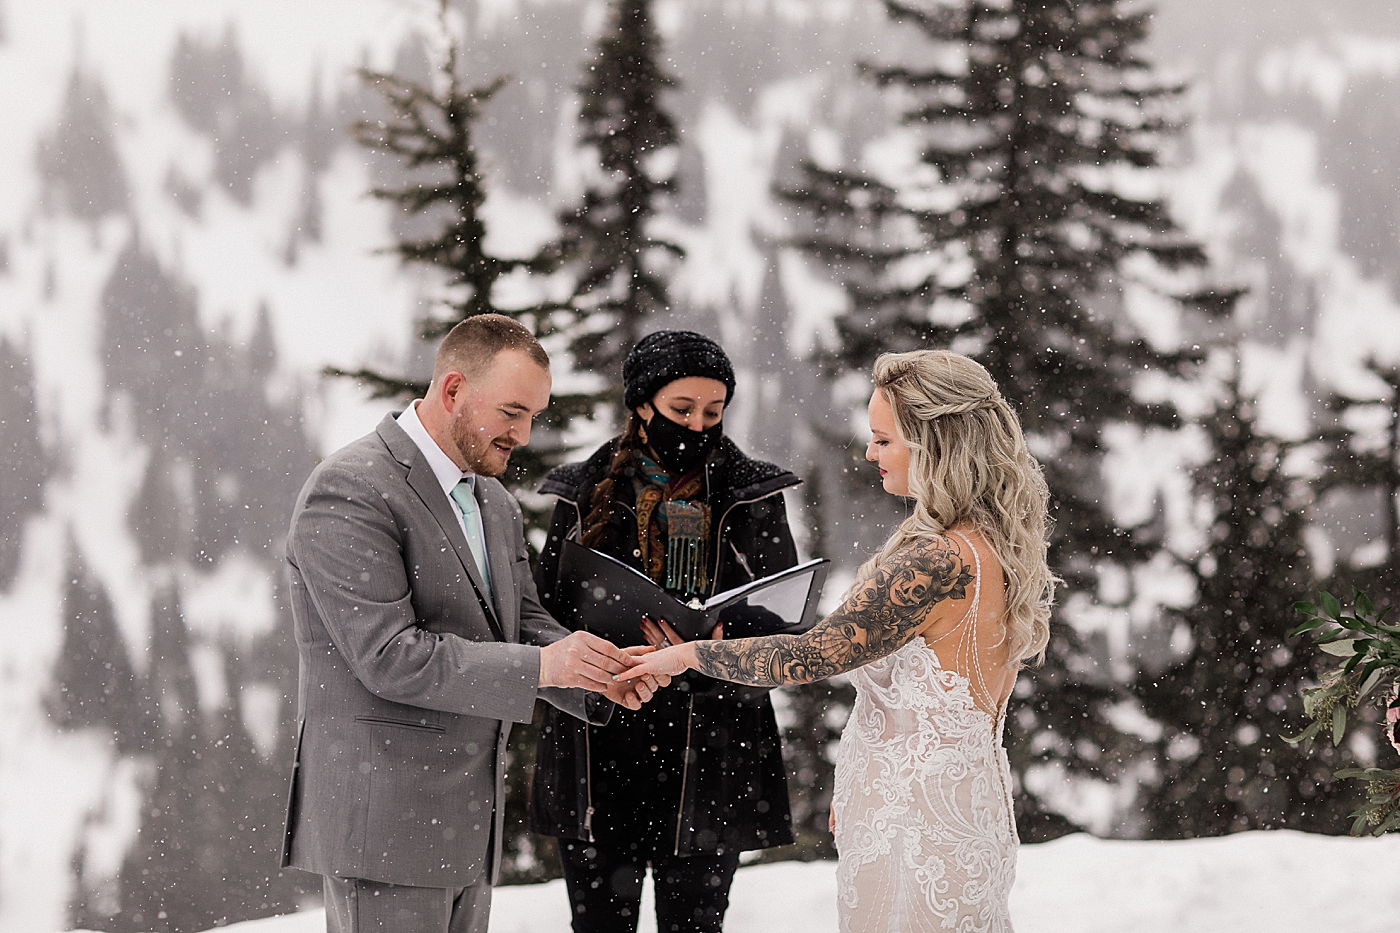 Ring exchange in the snow during elopement ceremony at Paradise at Mt Rainier. Photo by Megan Montalvo Photography.